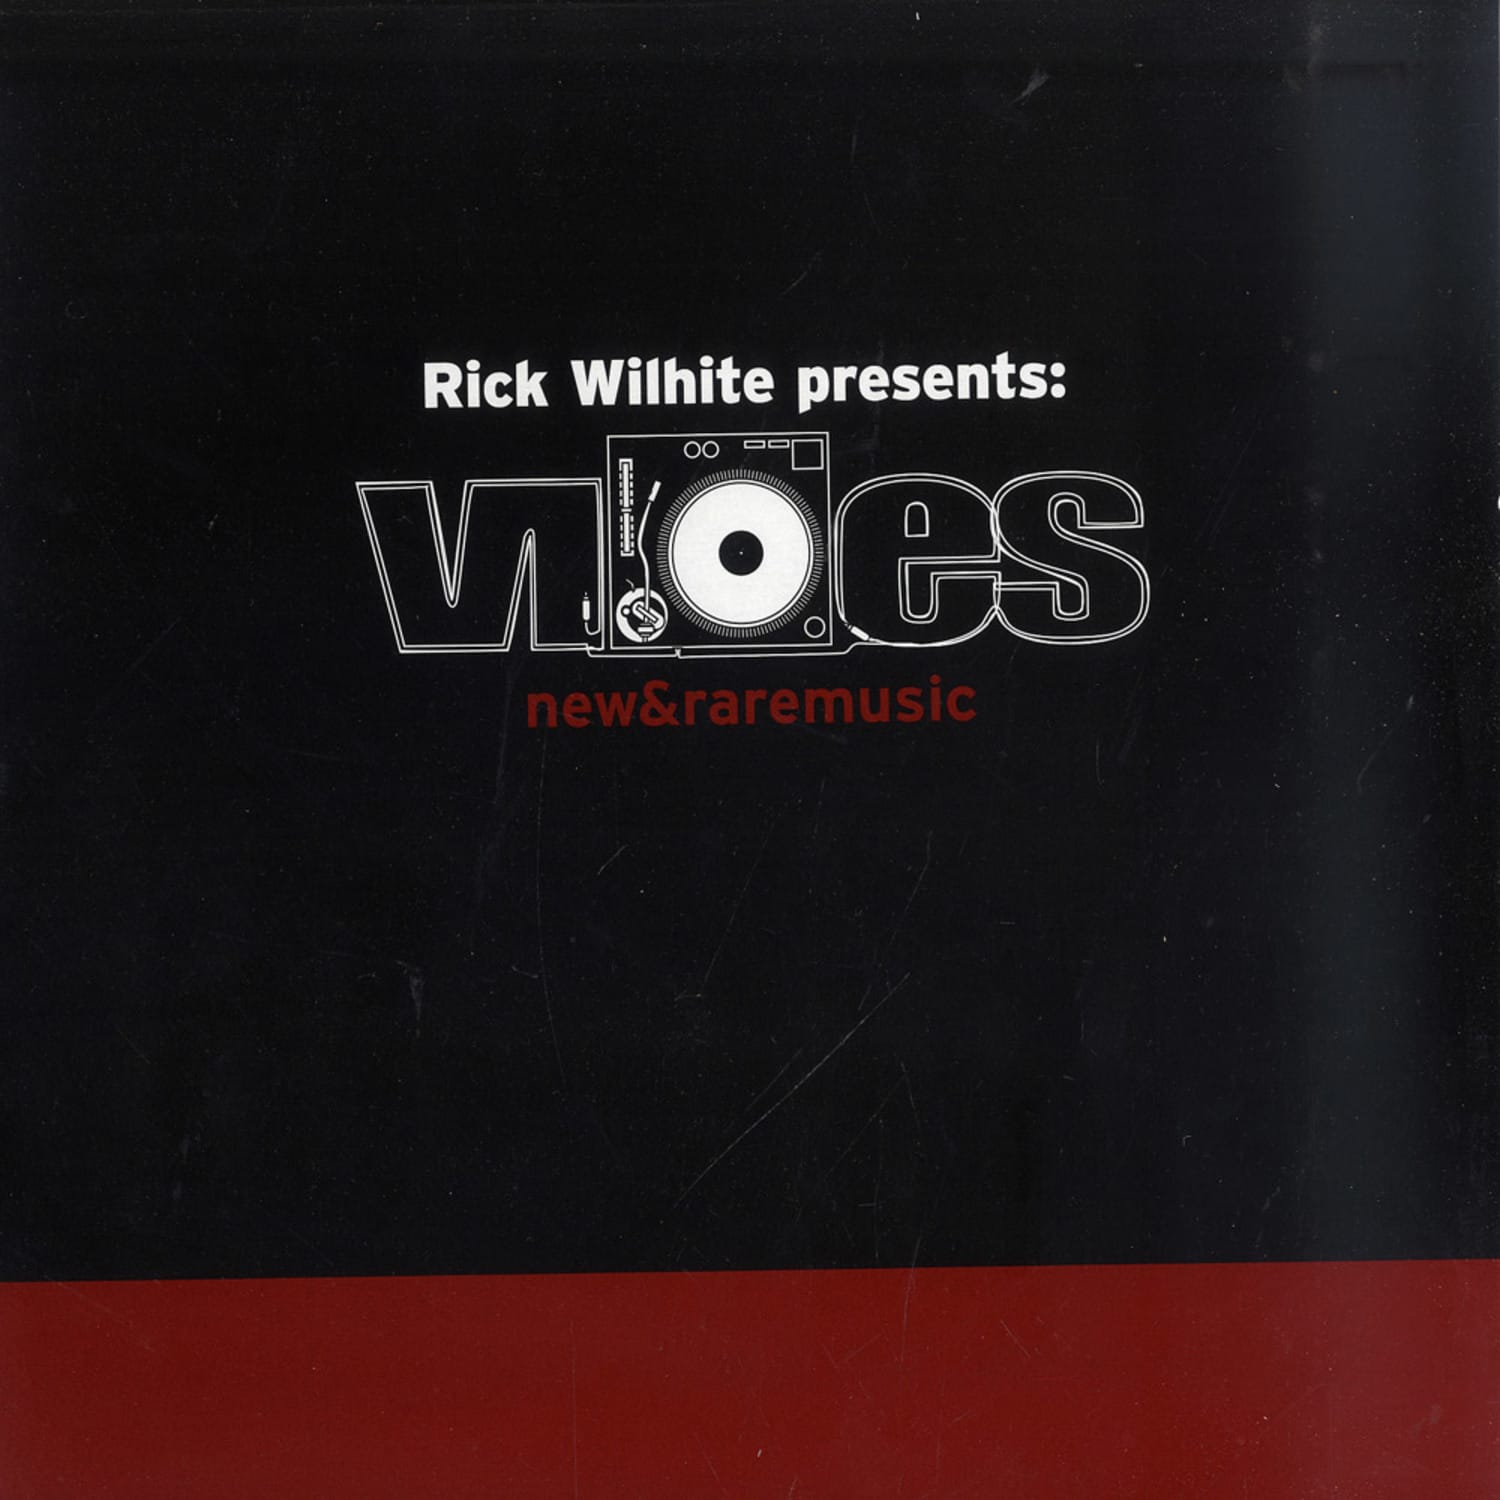 Rick Wilhite Presents - VIBES NEW&RARE MUSIC PART A